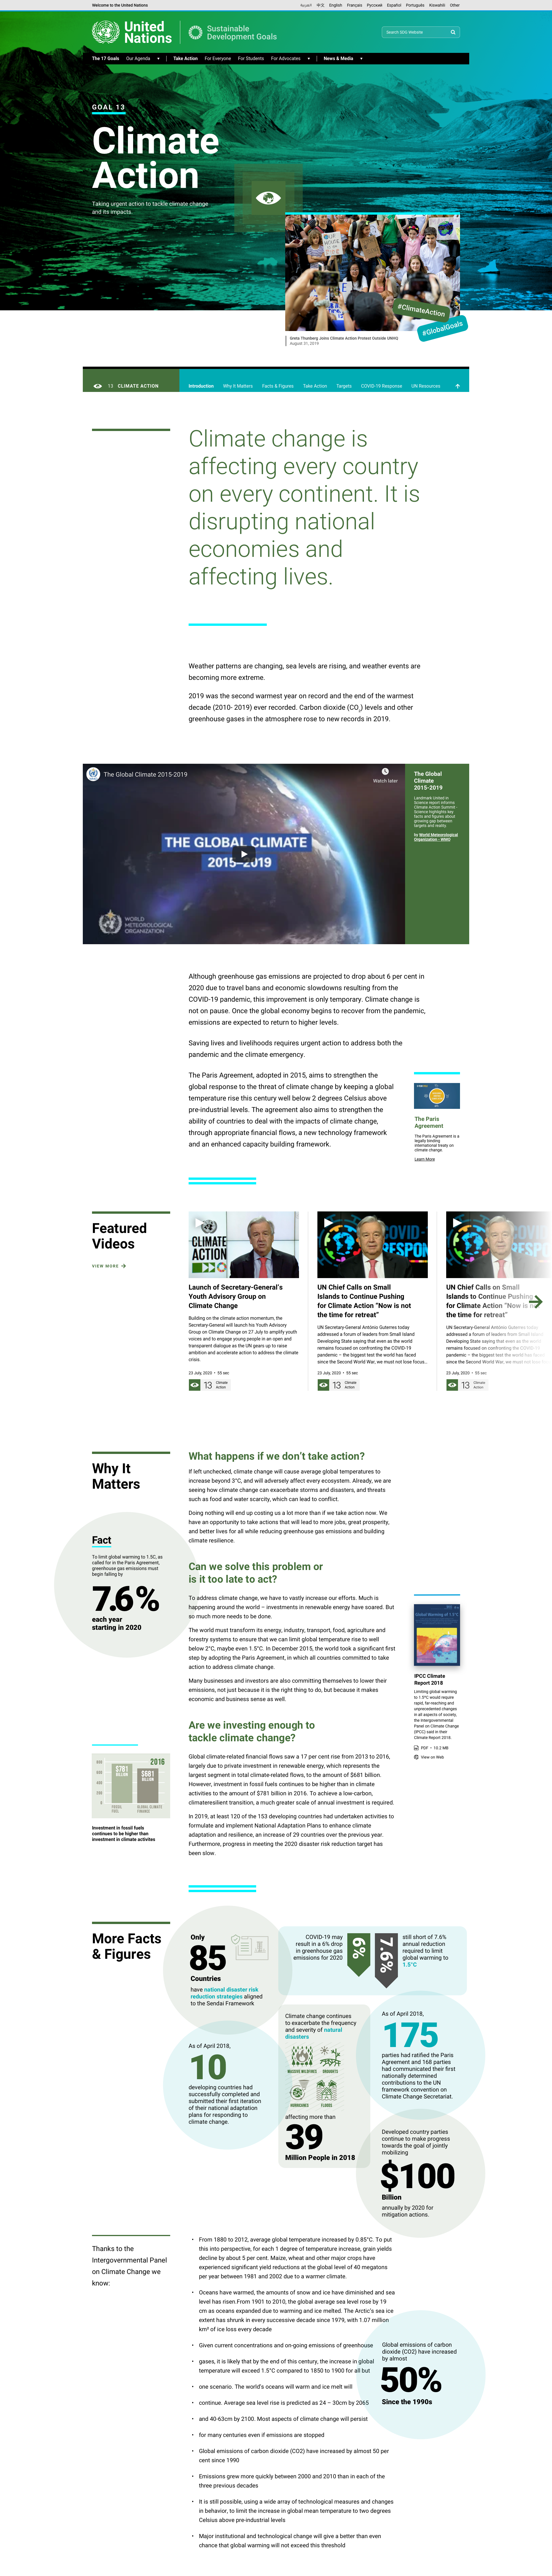 Climate Action section page layout